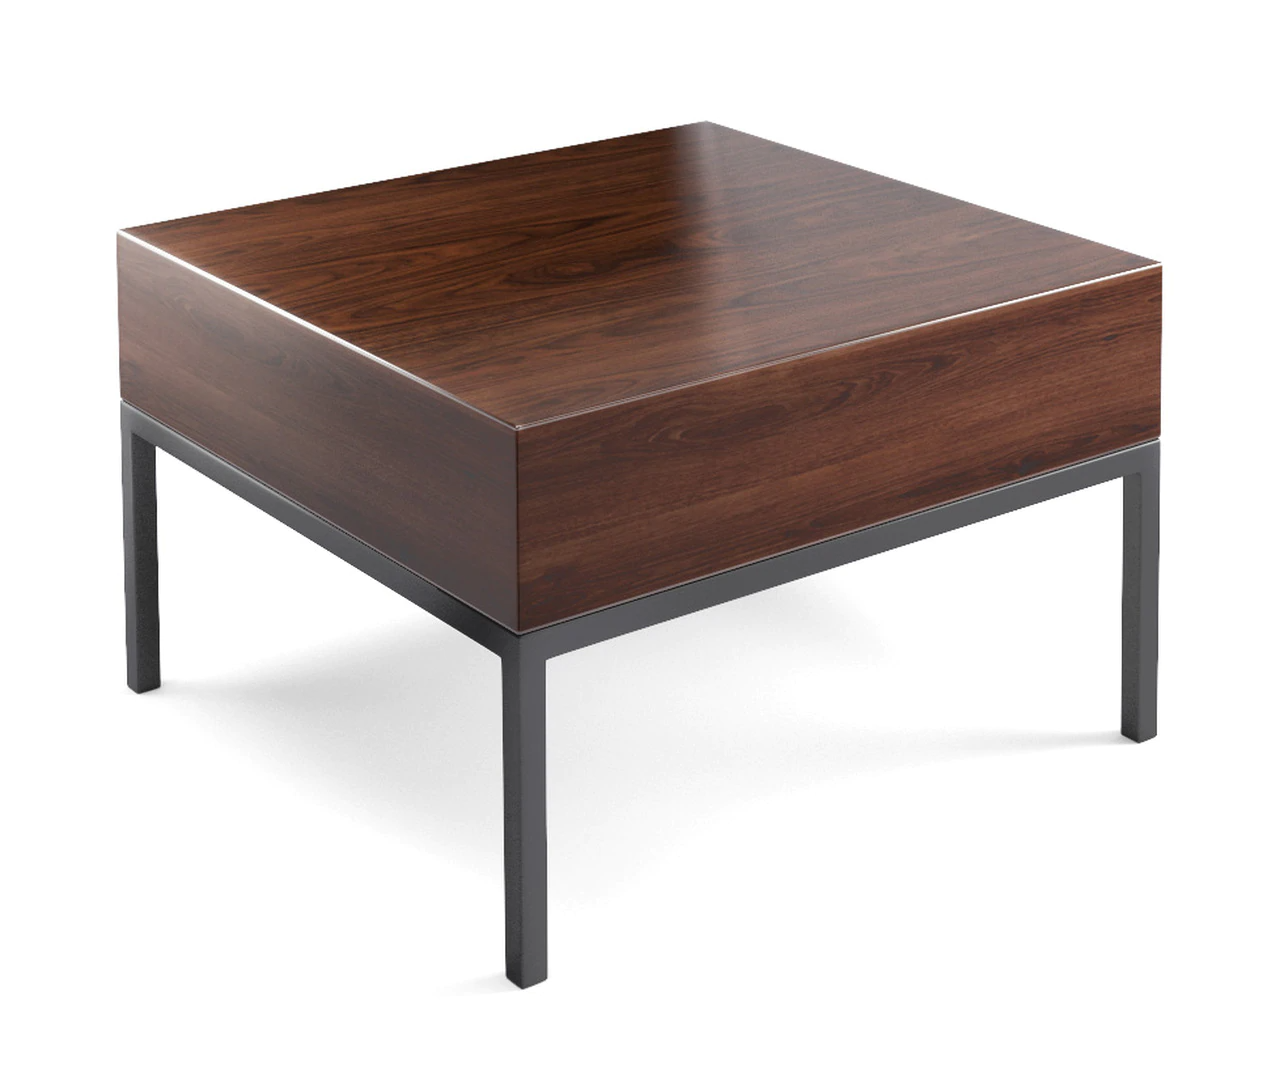 Walnut Occasional Side Table - Fully Welded Steel Frame With Dark